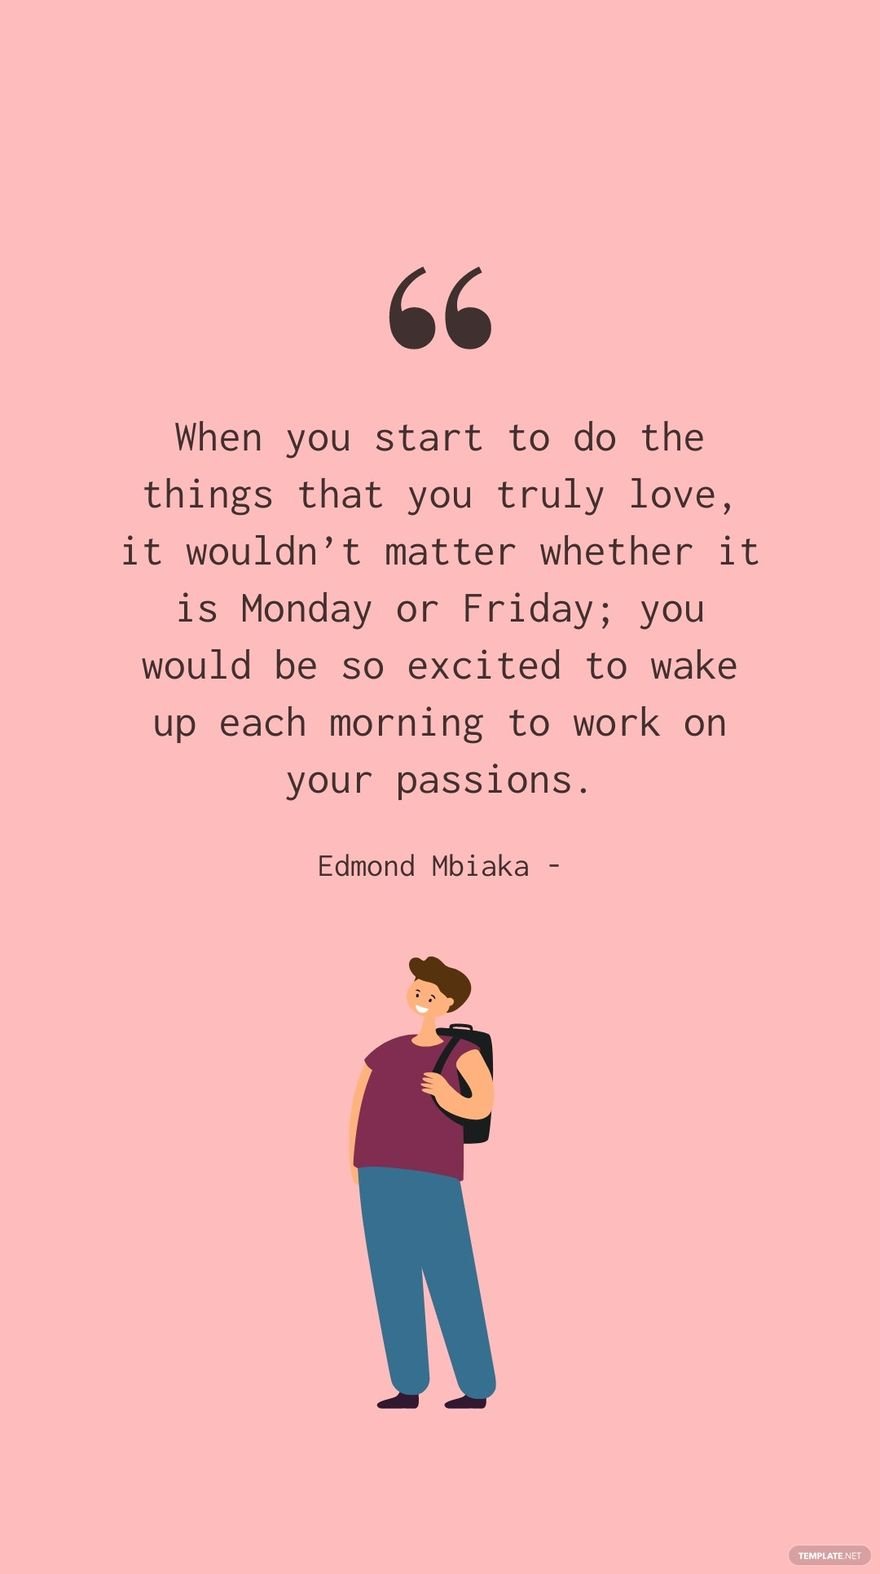 Edmond Mbiaka - When you start to do the things that you truly love, it wouldn’t matter whether it is Monday or Friday; you would be so excited to wake up each morning to work on your passions.